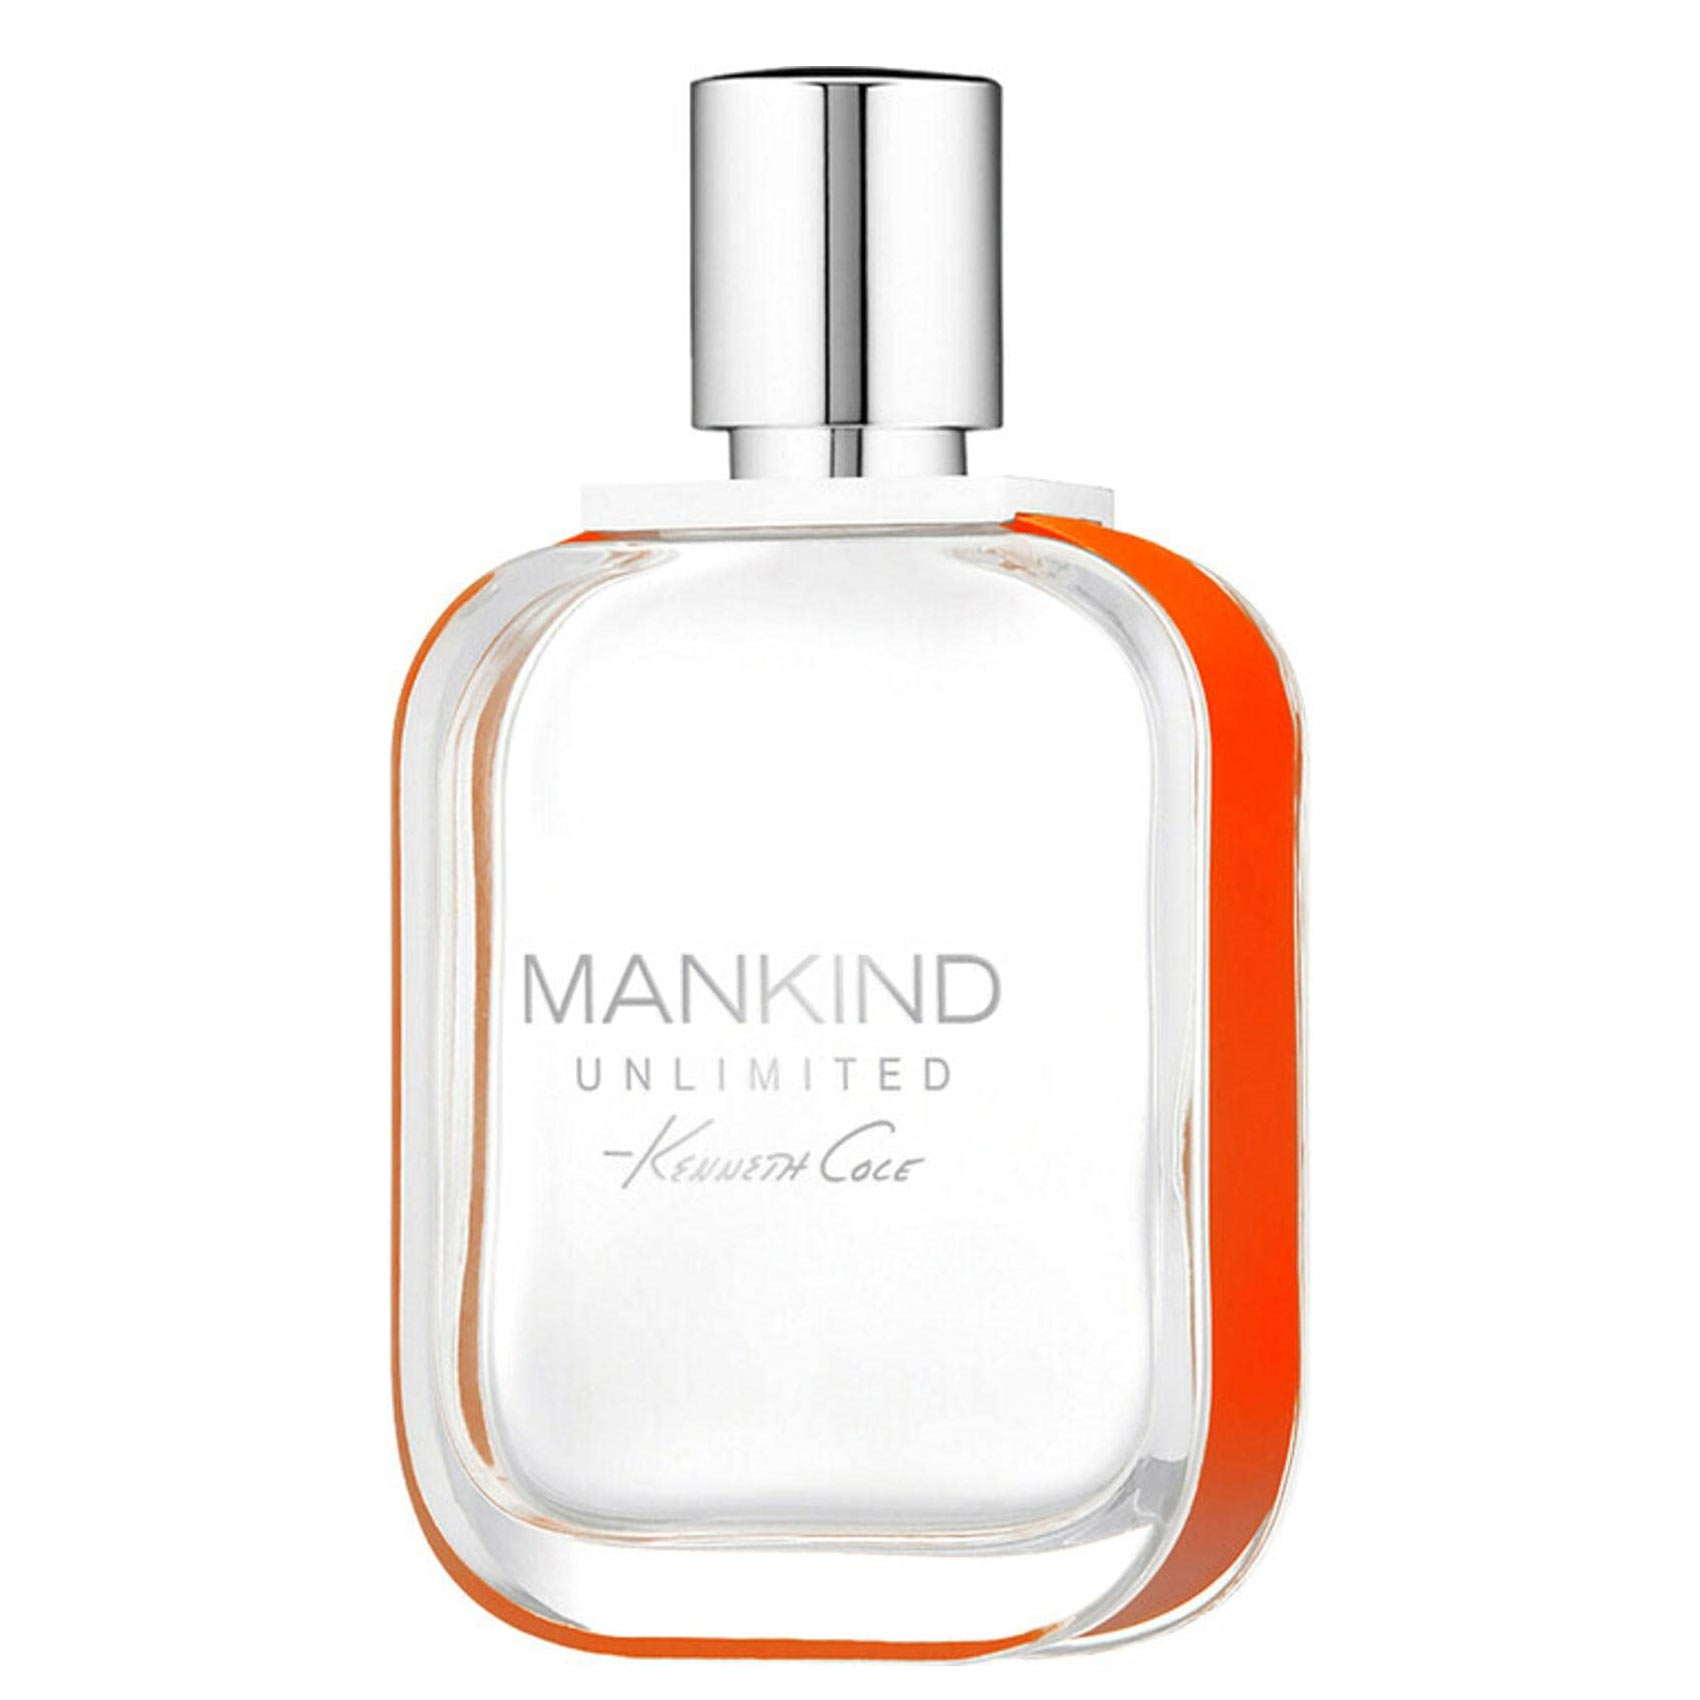 Mankind Unlimited Kenneth Cole Image